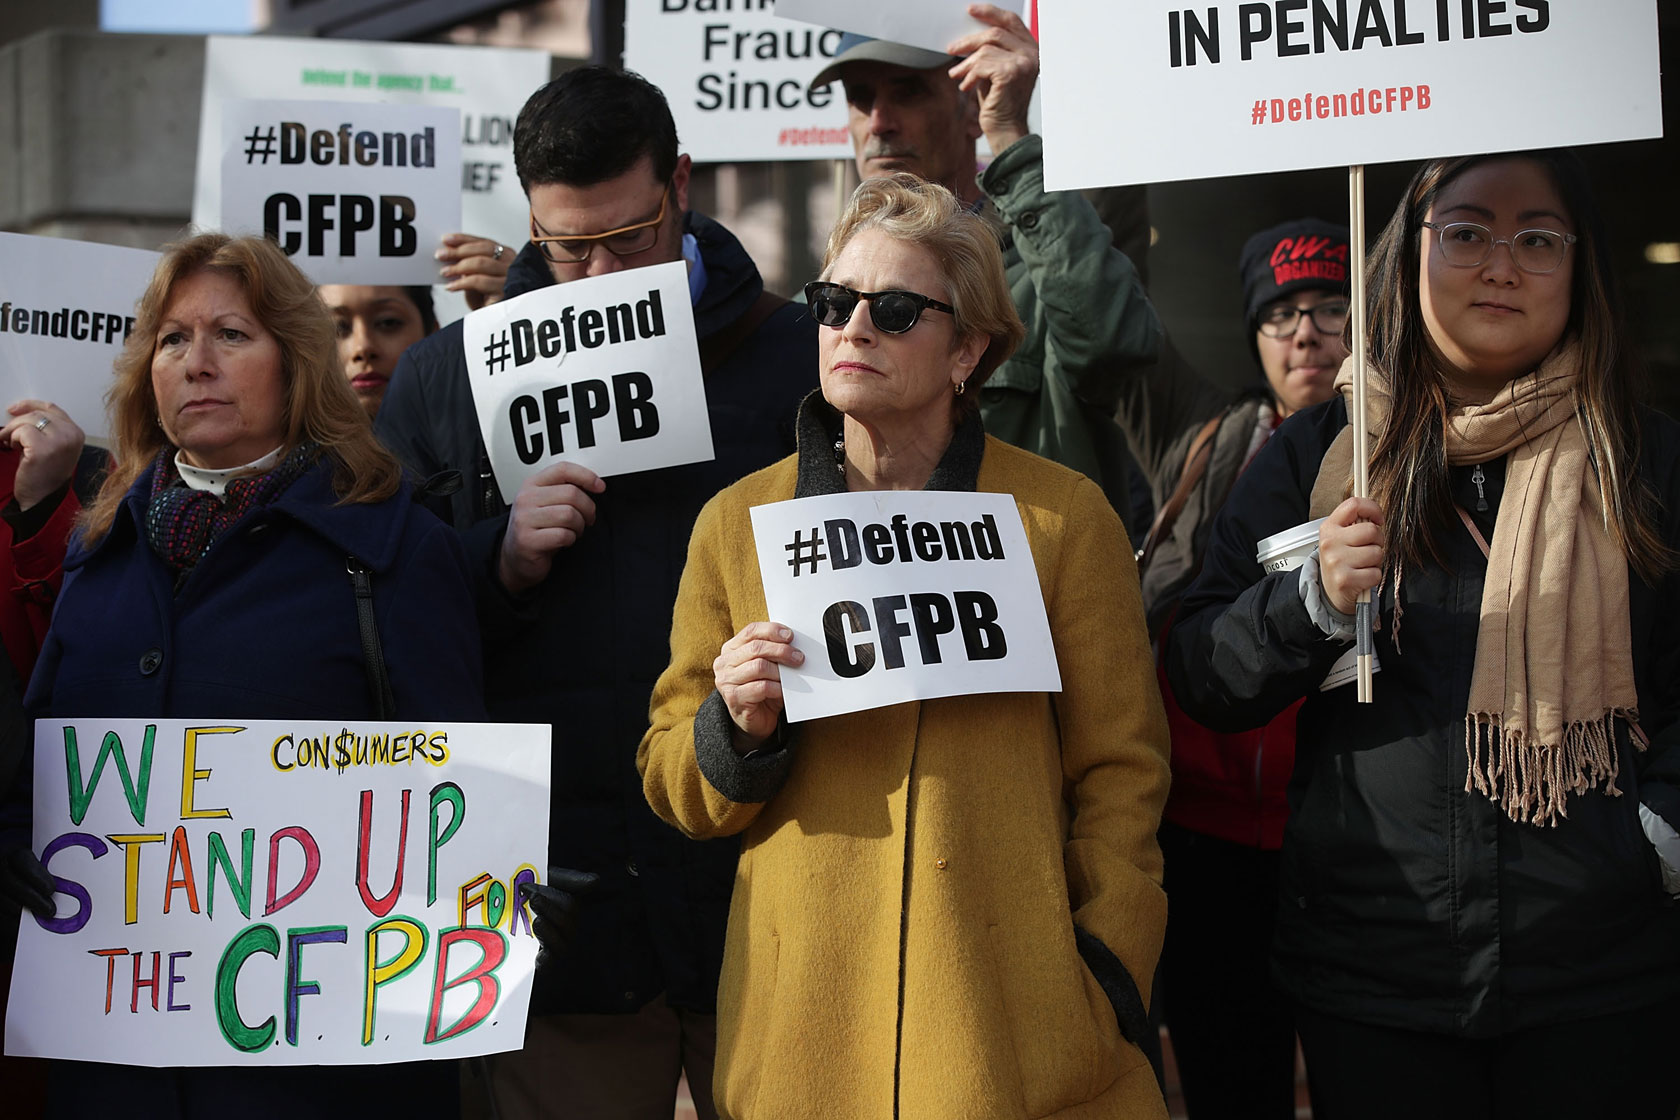 Supporters of the CFPB hold signs that read, “Defend CFPB” outside the agency’s building.